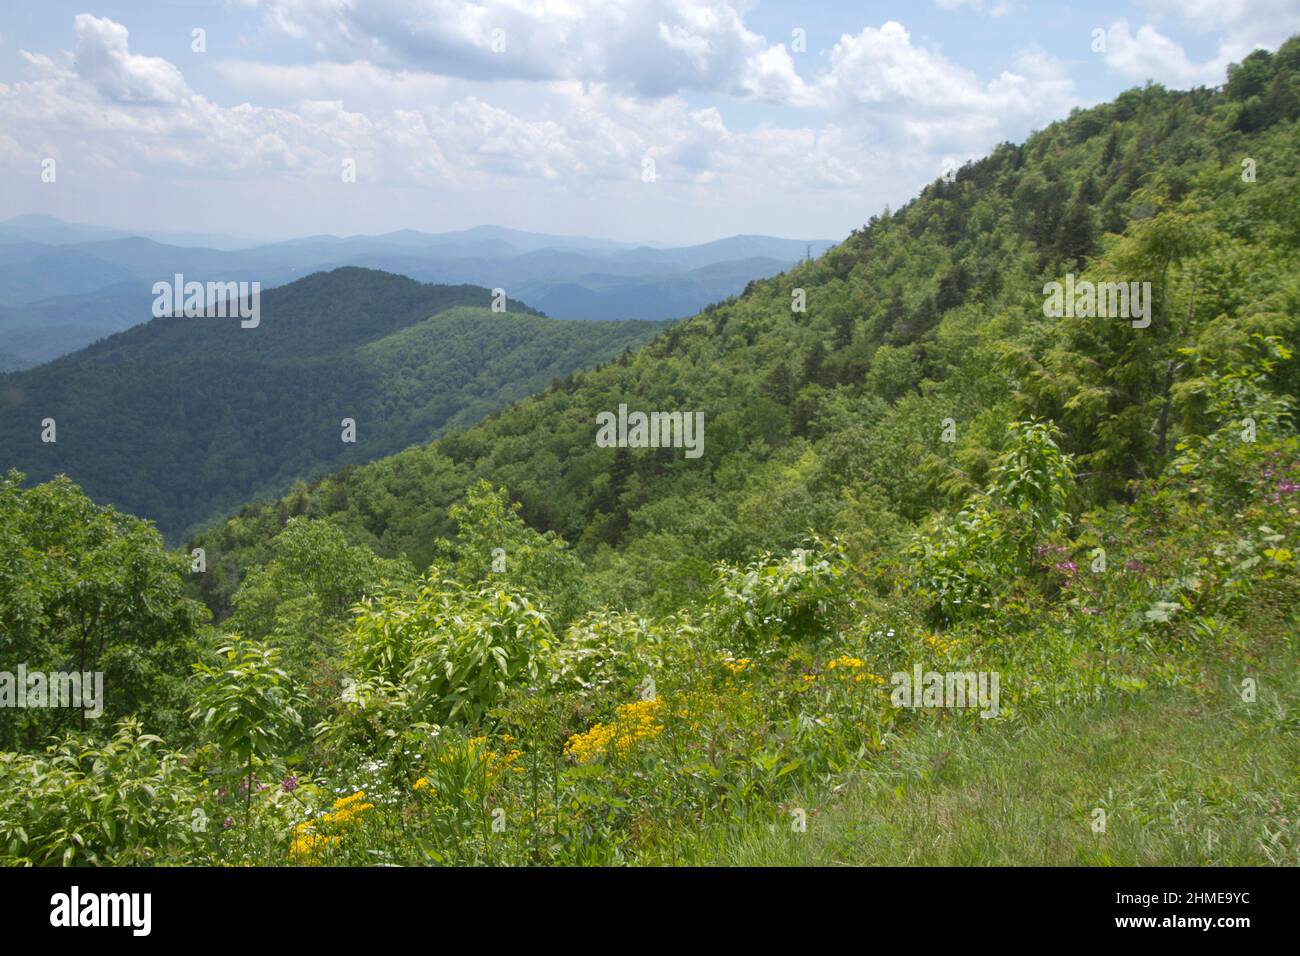 Scenic vista from the North Carolina Blue Ridge Parkway looking out at the lushly beautiful Appalachian Mountains with wildflowers in the foreground Stock Photo